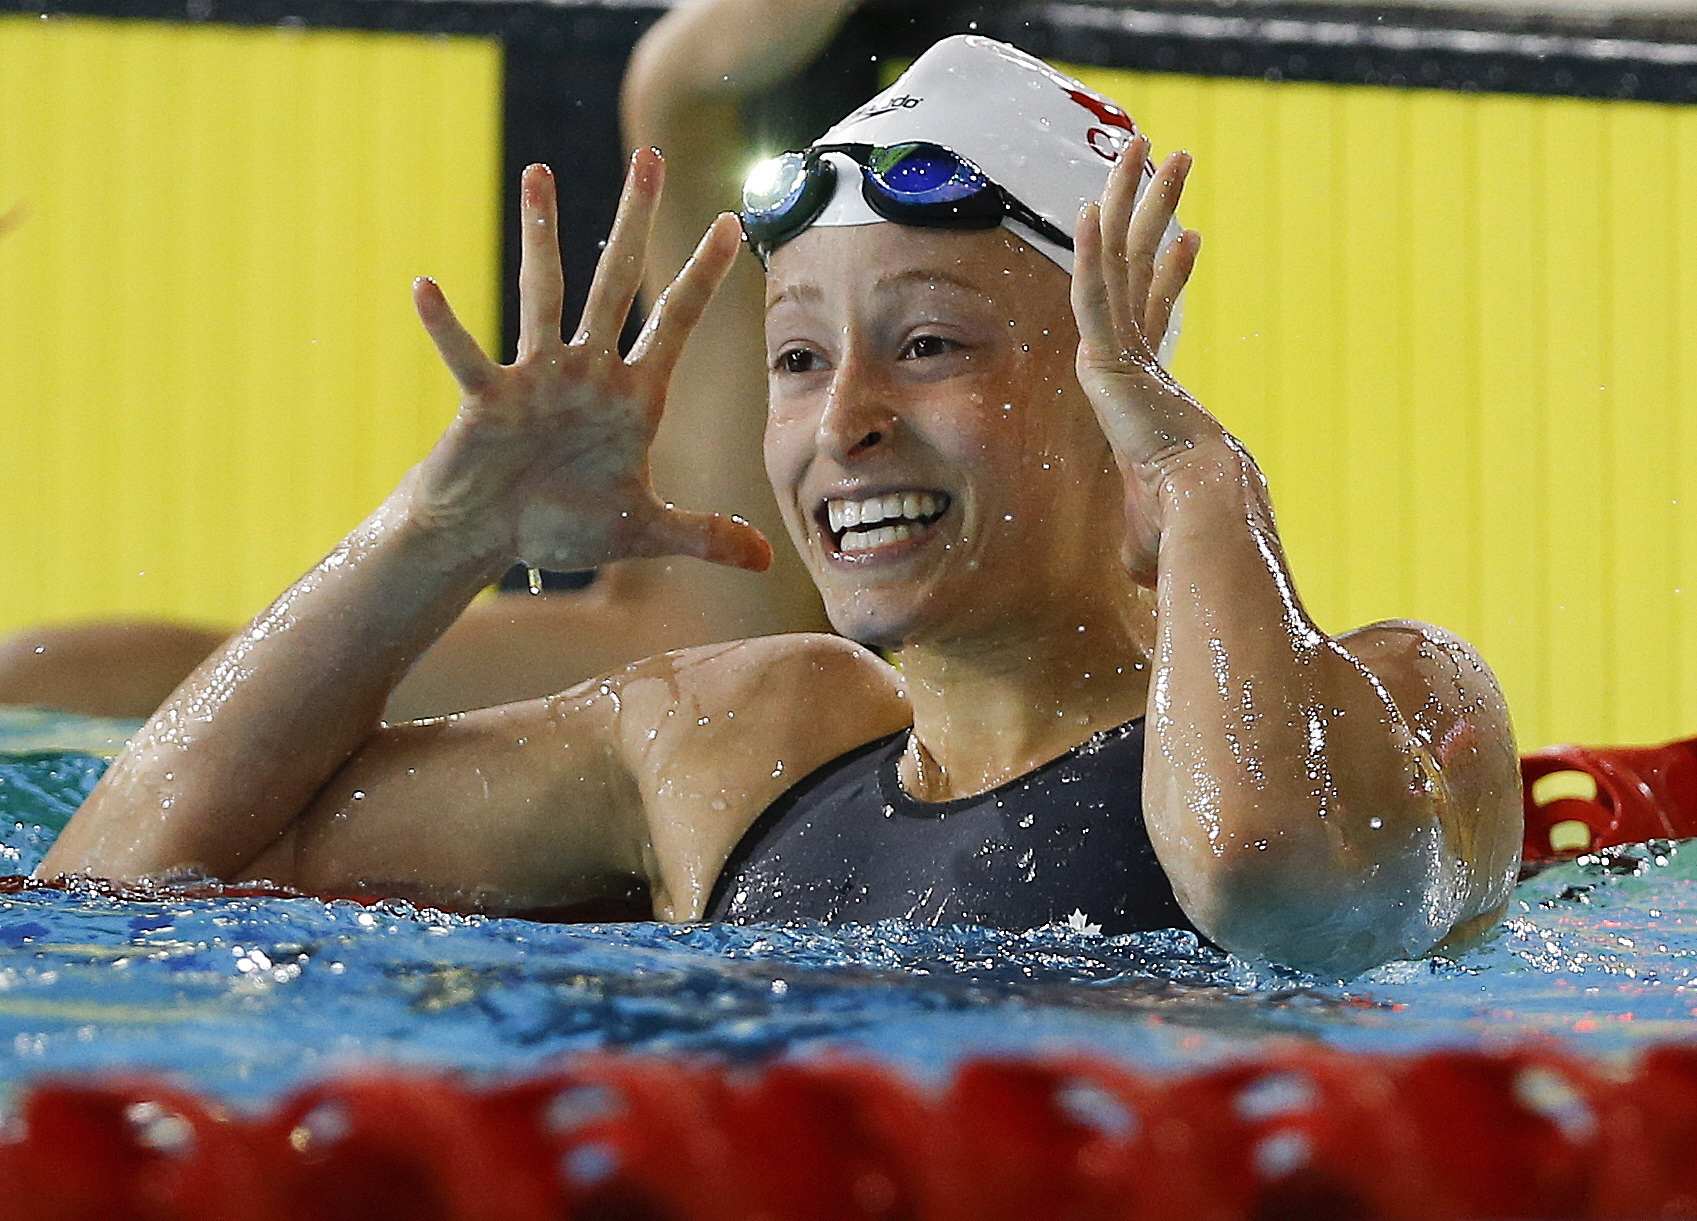 Katerine Savard of Canada celebrates winning gold in the Women's 100m Butterfly final at the Tollcross International Swimming Centre during the Commonwealth Games 2014 in Glasgow, Scotland, Friday July 25, 2014. (AP Photo/Kirsty Wigglesworth)